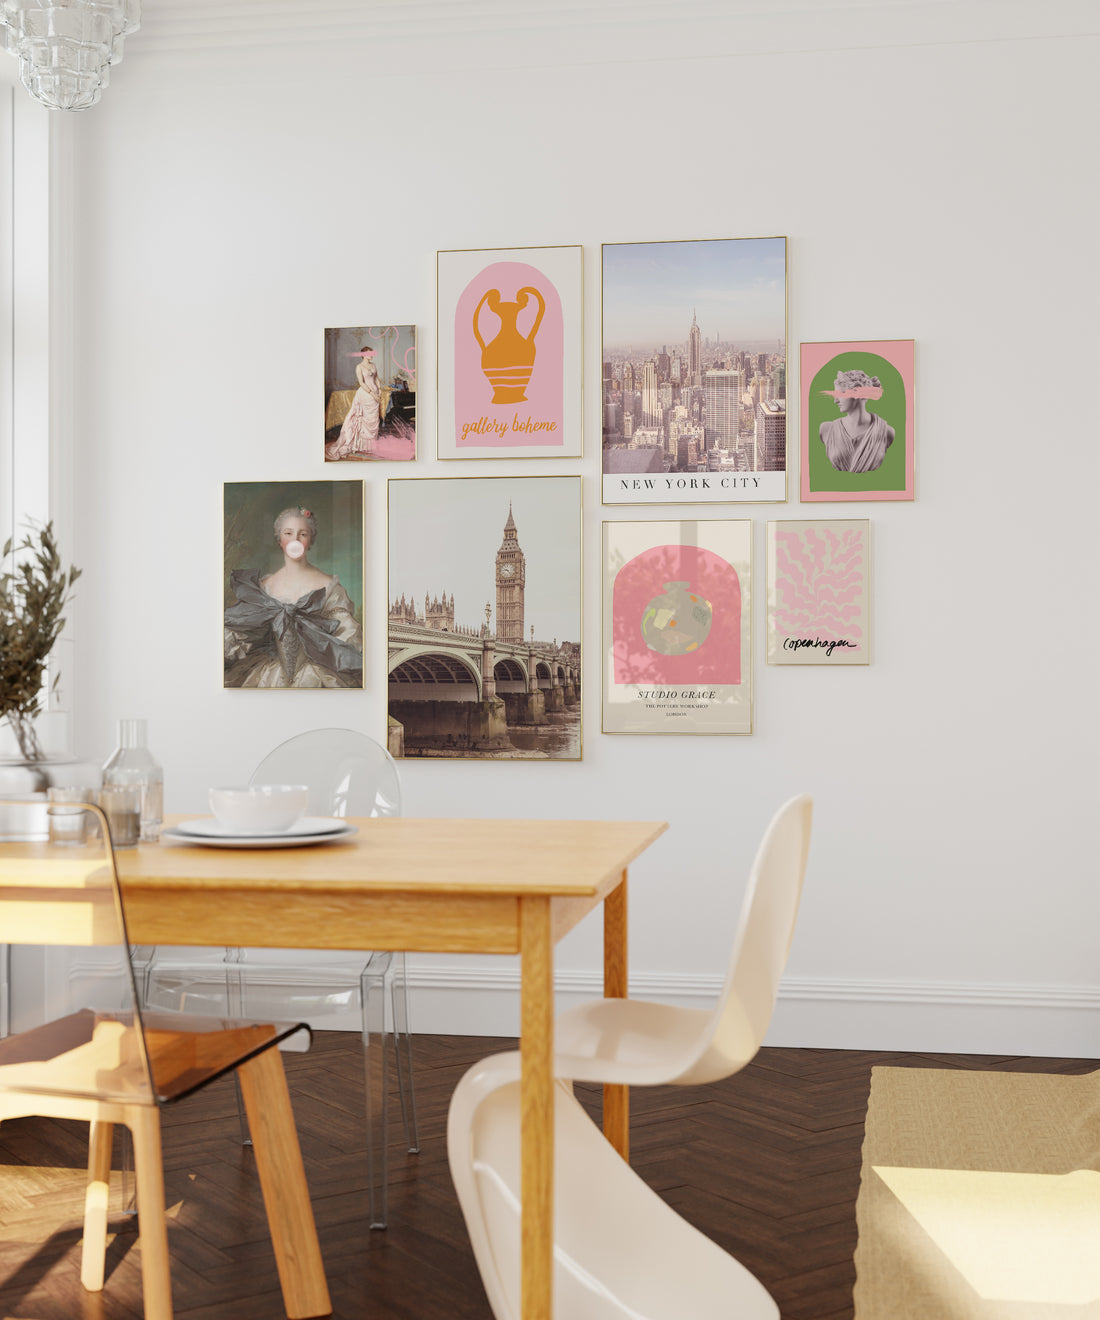 Art for the dining area